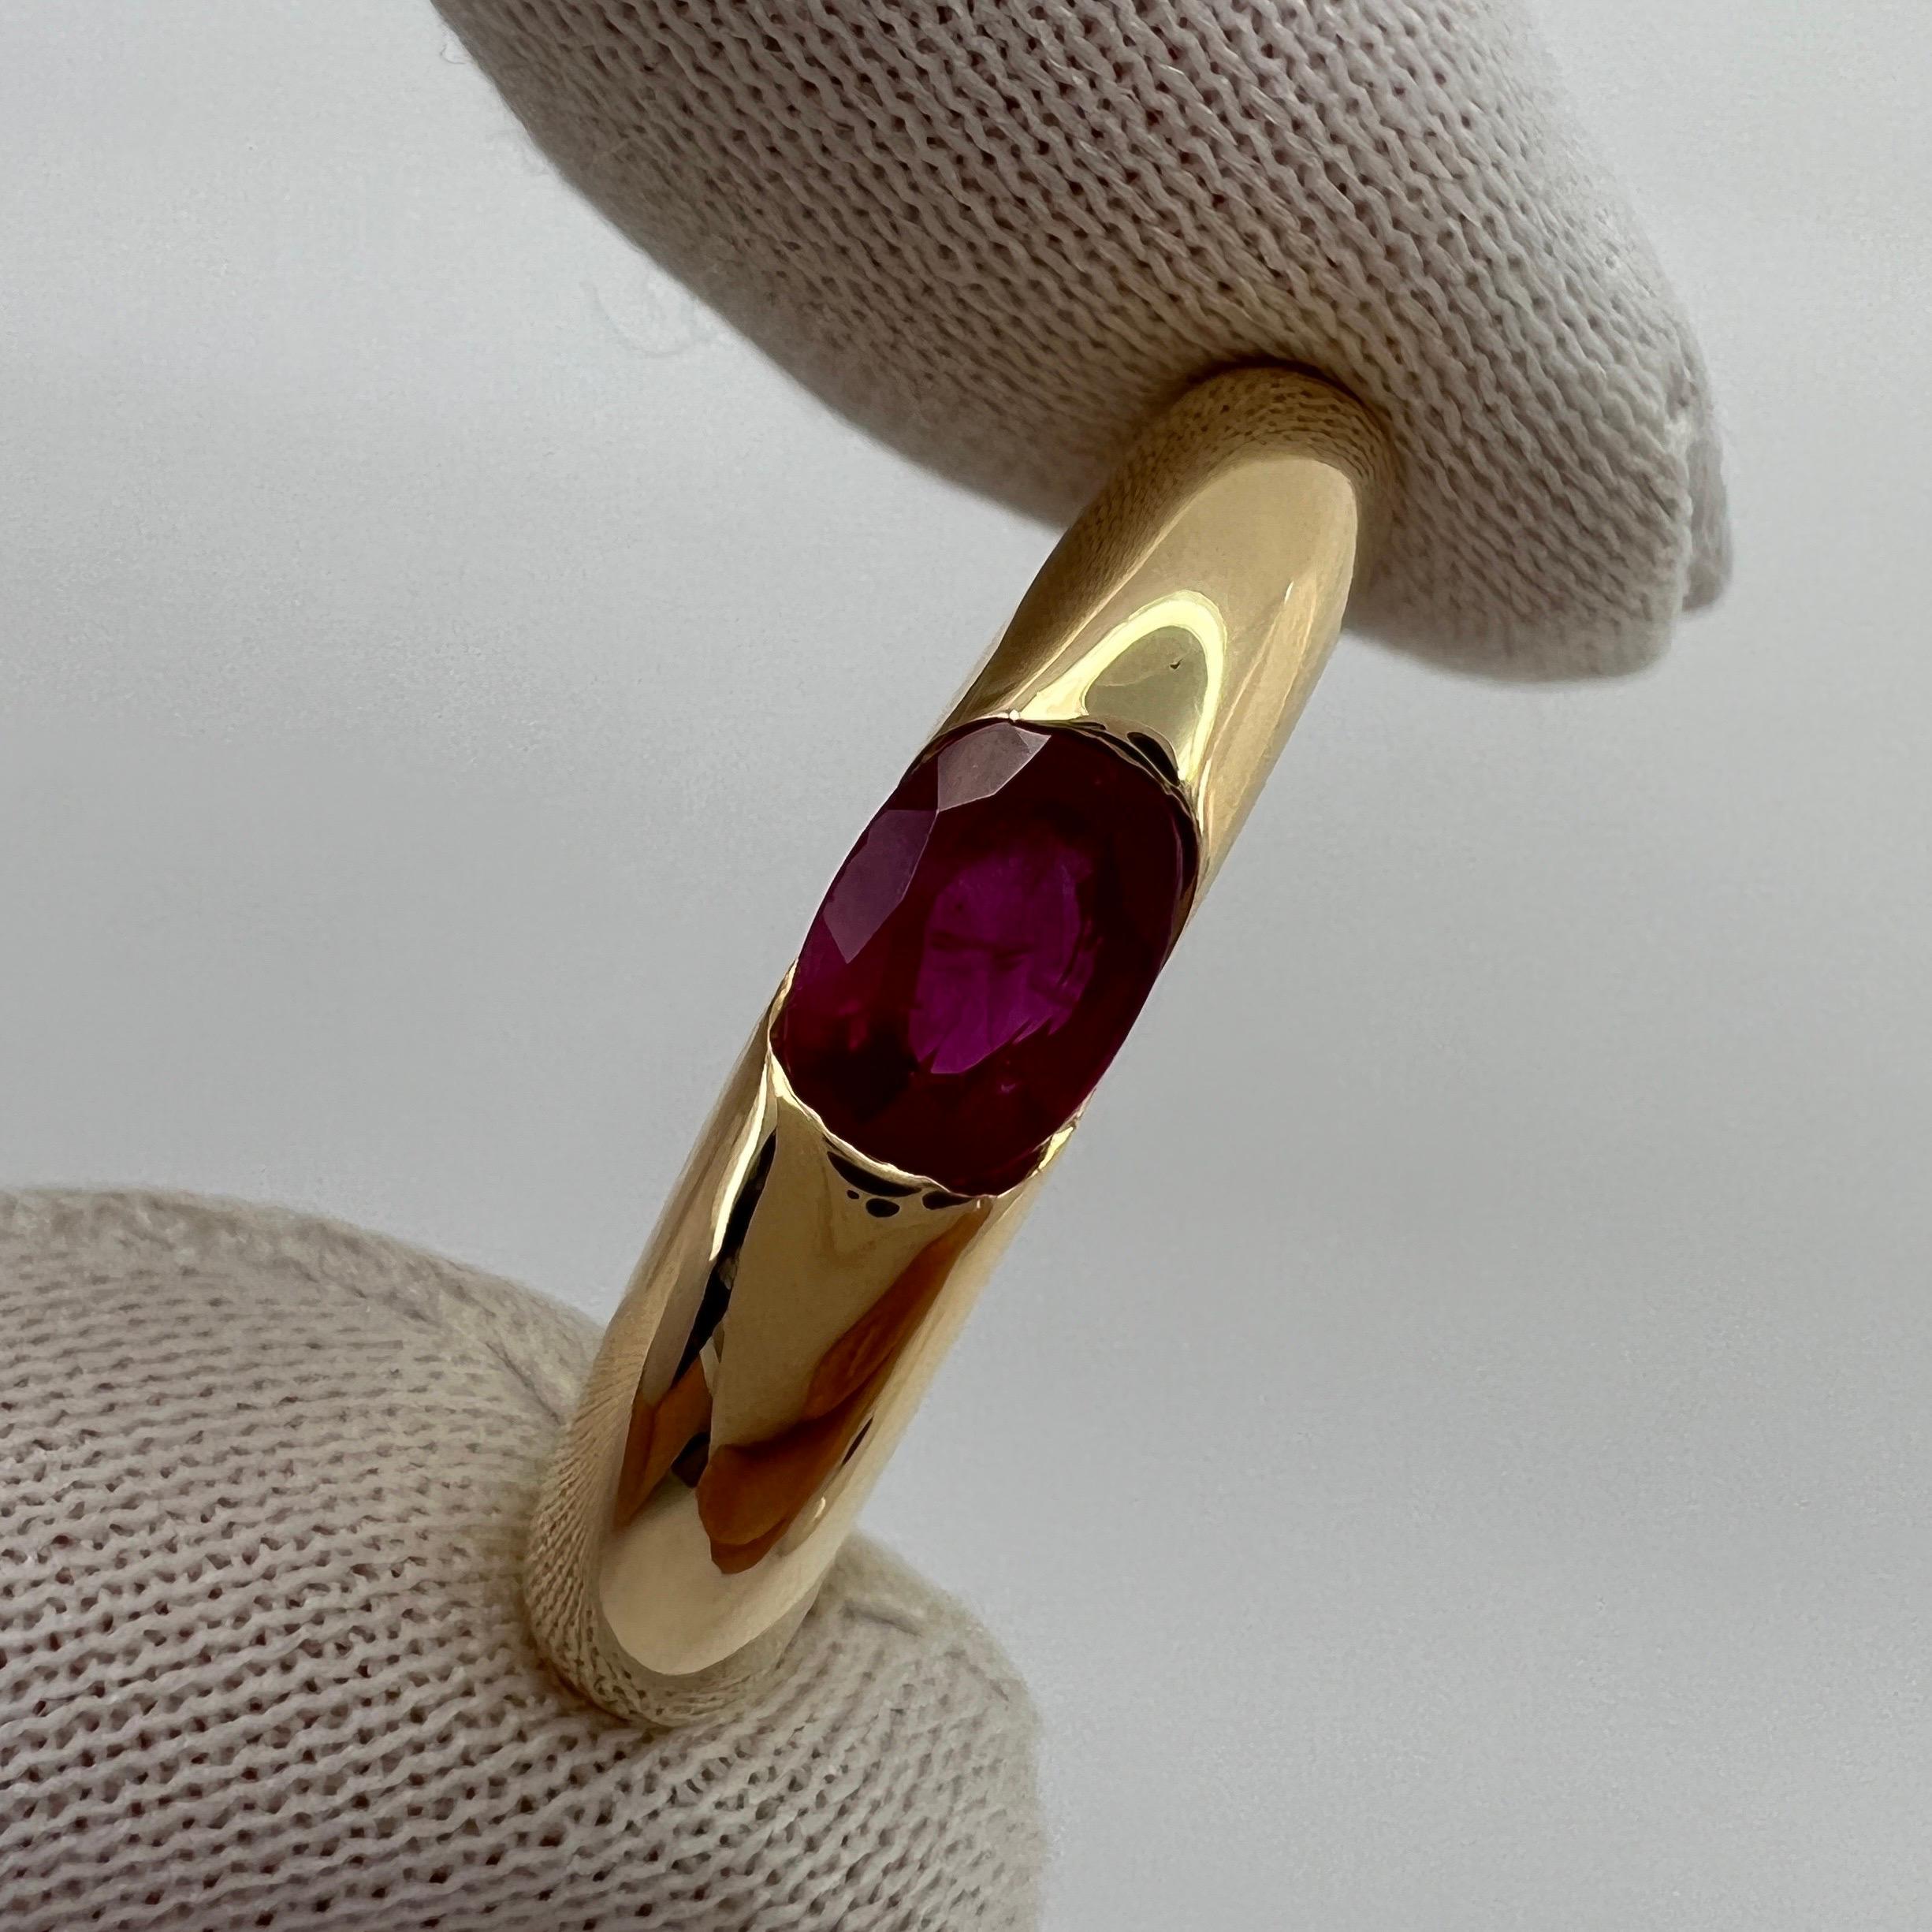 Vintage Cartier Deep Red Ruby Ellipse 18k Yellow Gold Oval Solitaire Ring 49 US5 For Sale 4